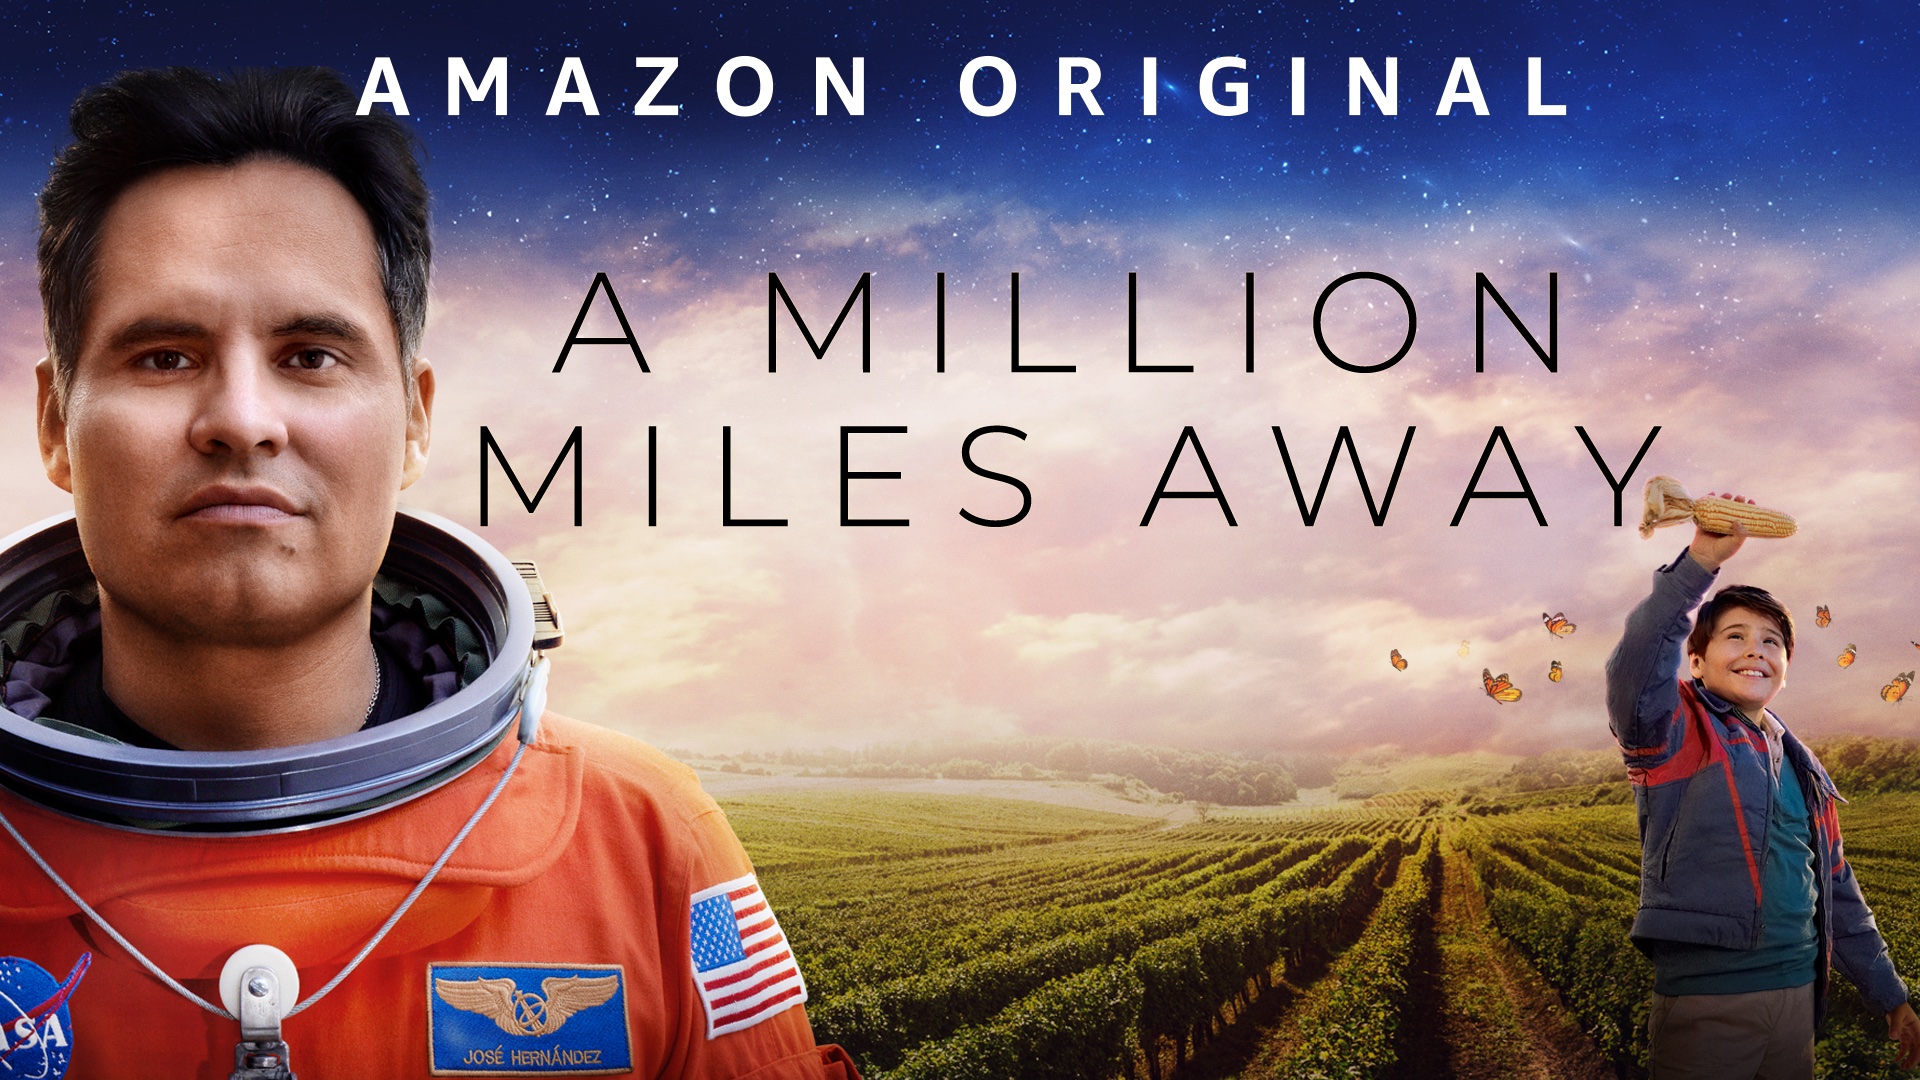 A Million Miles Away Cast - Every Actor and Character in the 2023 Amazon Movie